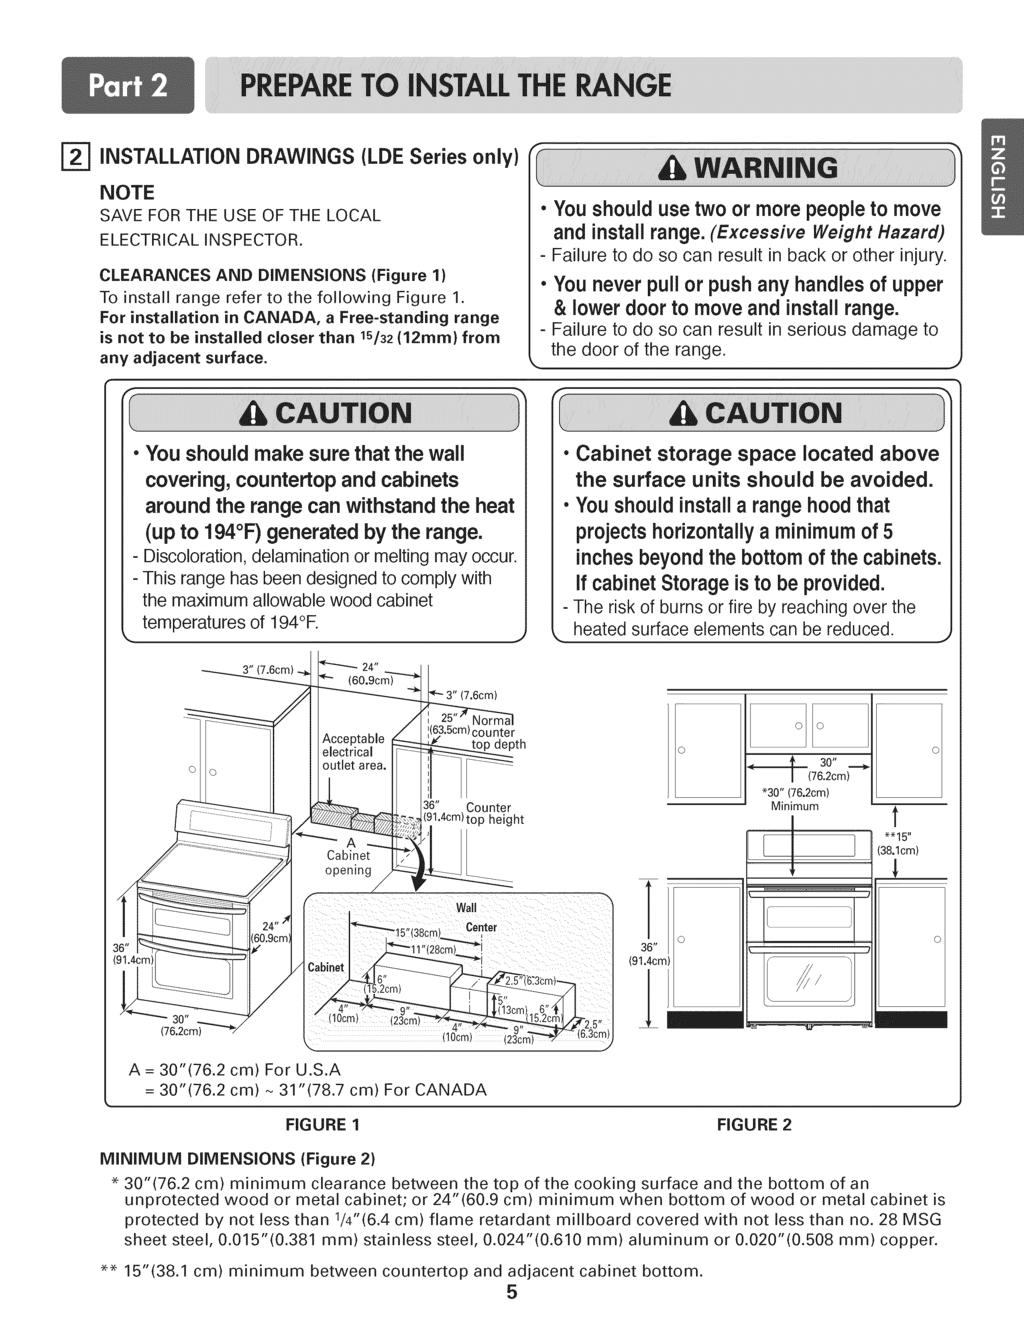 % installation DRAWINGS (LDE Series only) NOTE SAVE FOR THE USE OF THE LOCAL ELECTRICAL INSPECTOR. CLEARANCES AND DIMENSIONS (Figure 1) To install range refer to the following Figure 1.